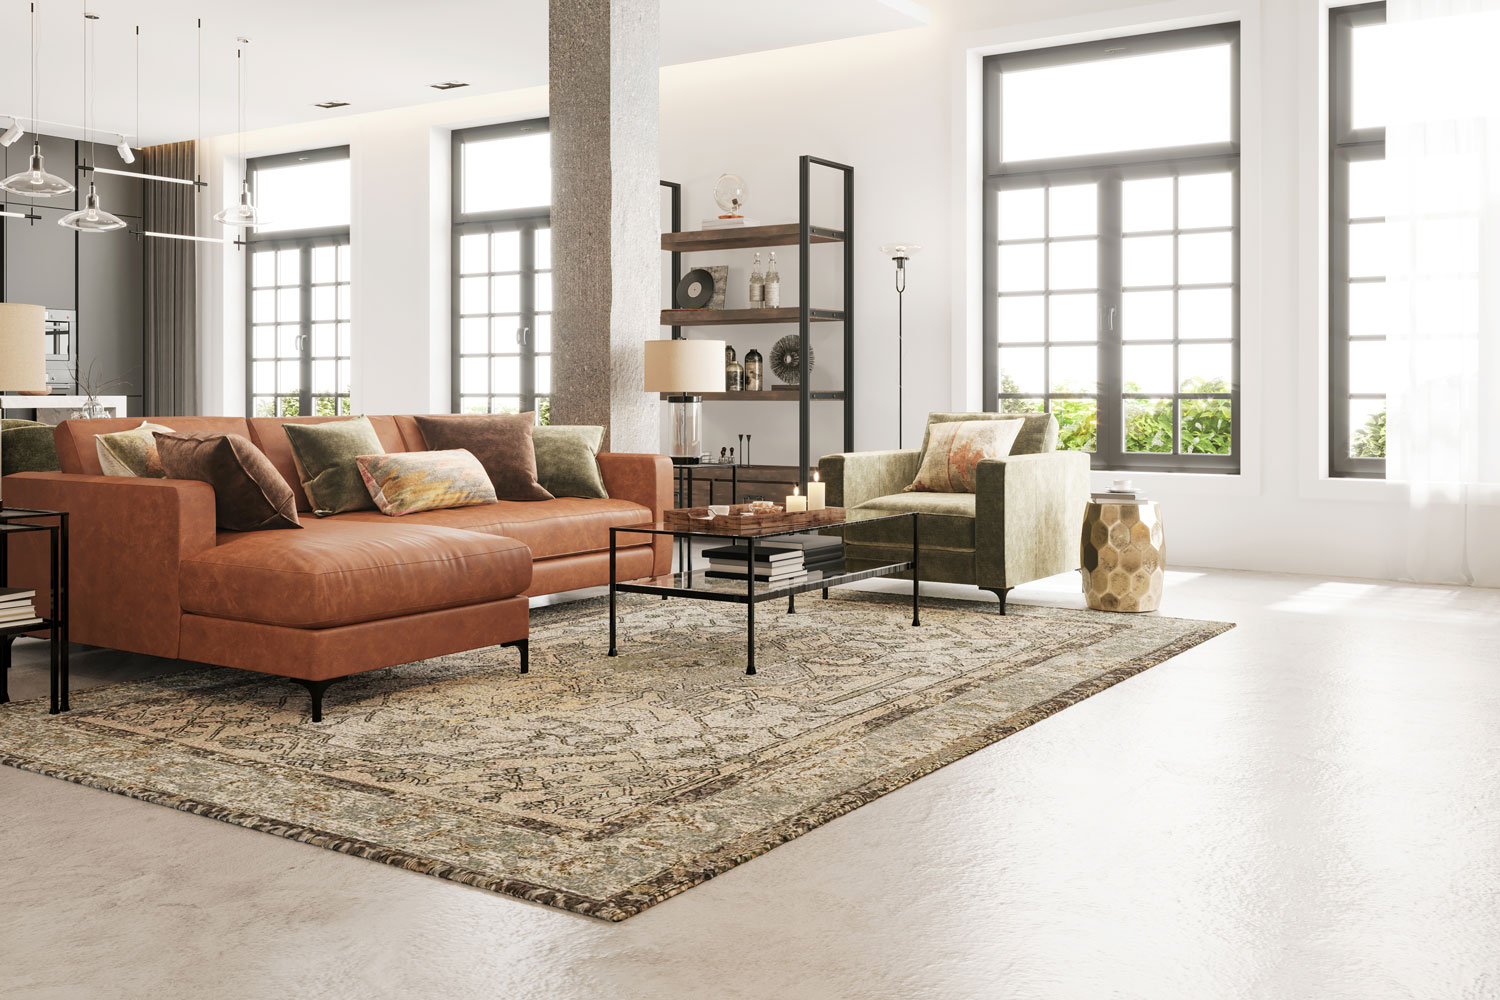 A huge rug and leather sofa inside an industrial inspired living room, Rug Is Too Big—What To Do?